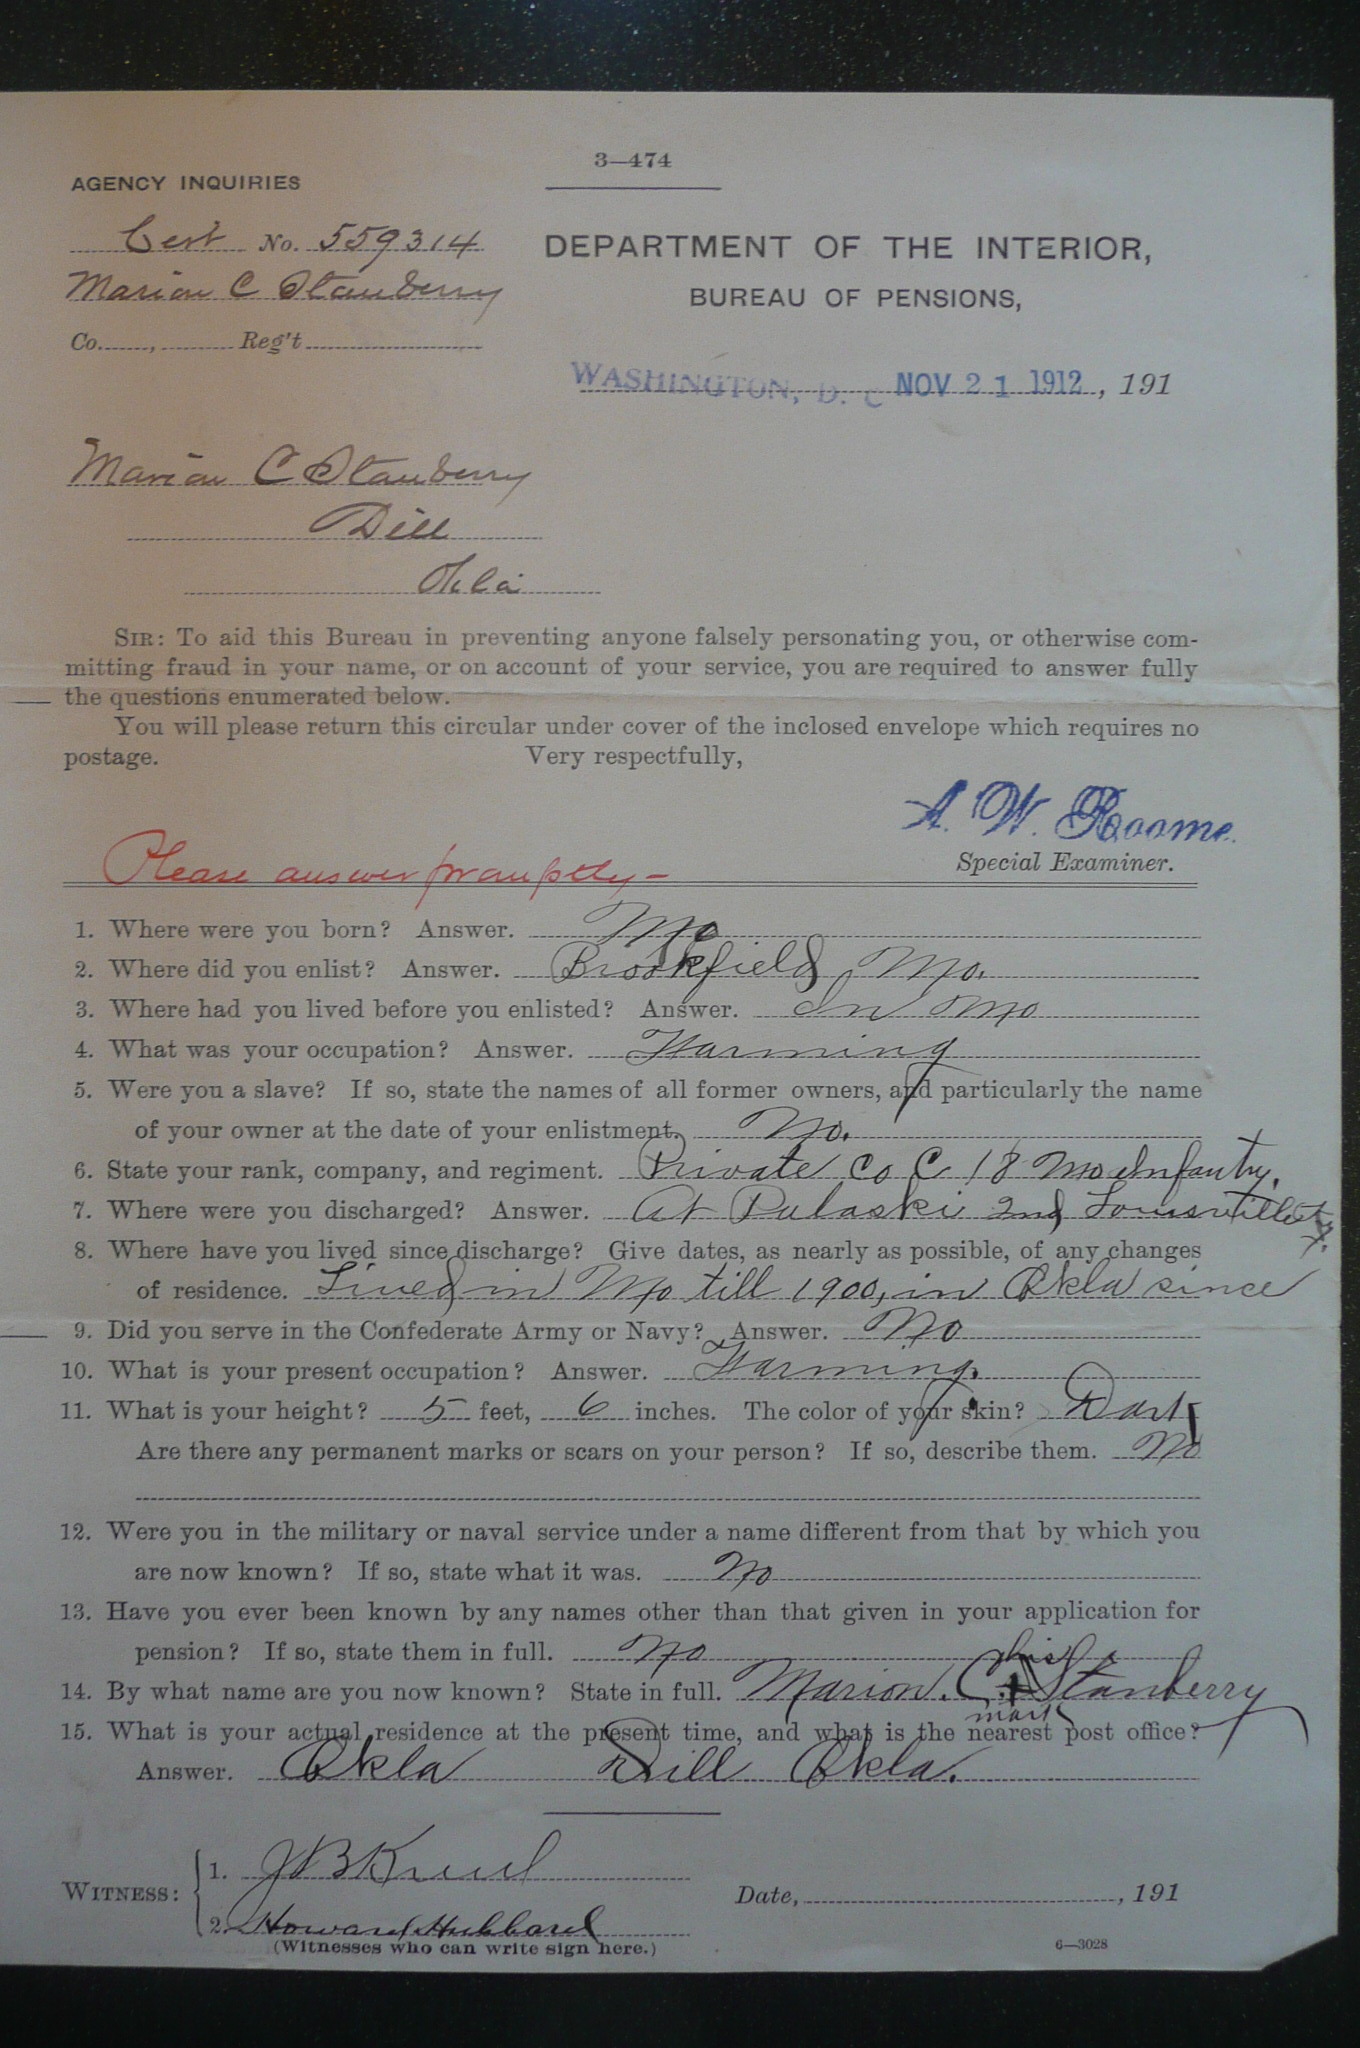 Reply to Inquiry, 1912